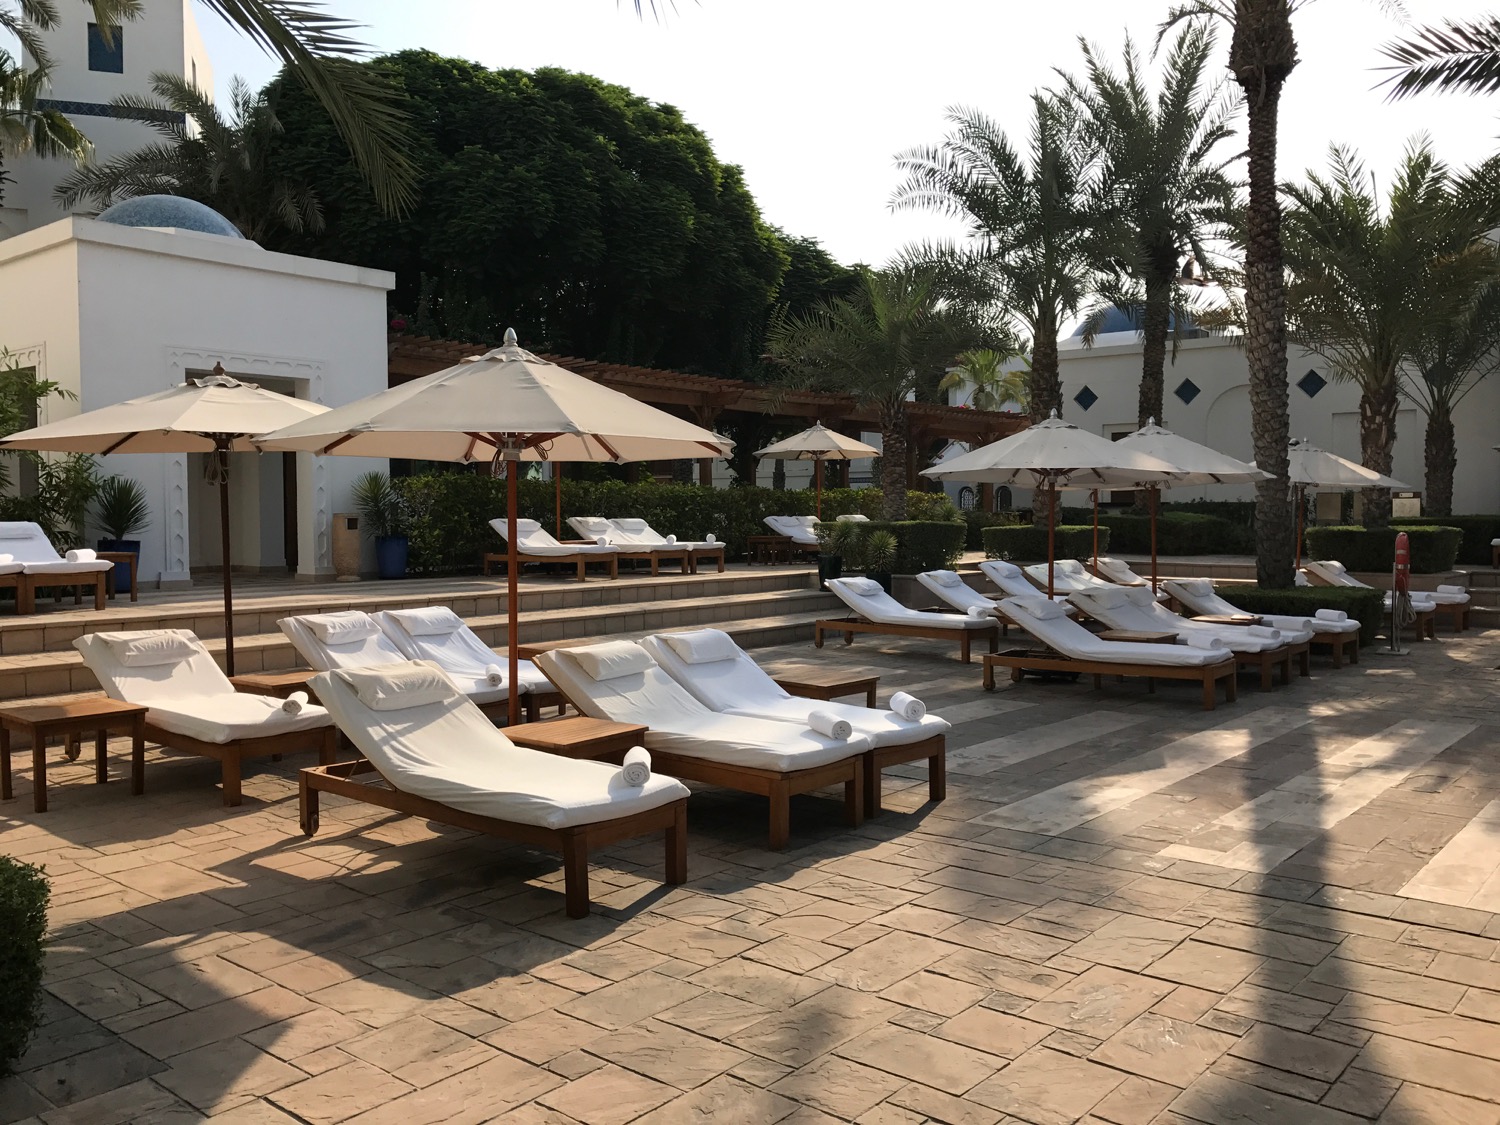 a group of lounge chairs and umbrellas outside